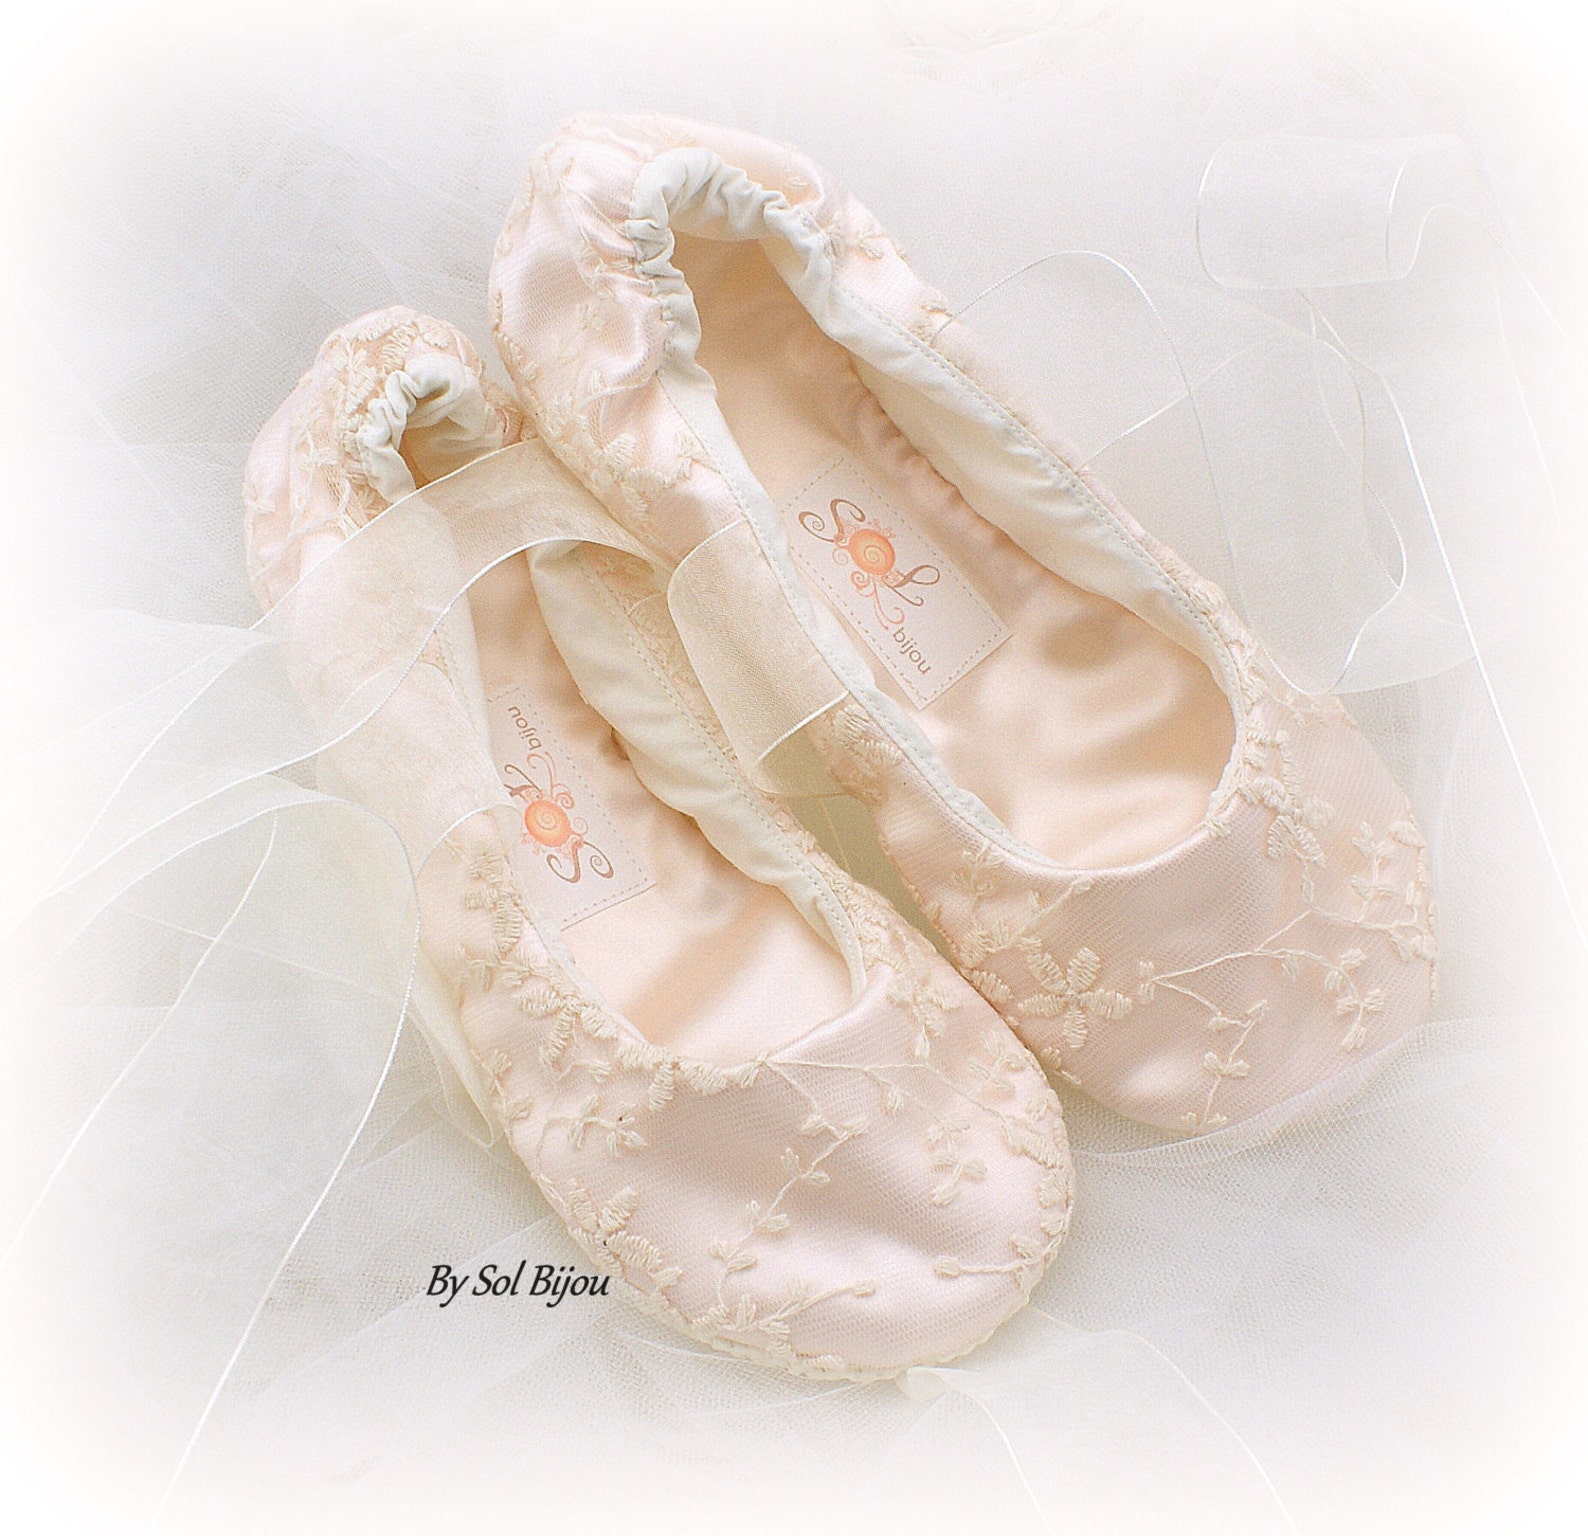 wedding ballet shoes in blush and ivory lace with ribbon ties